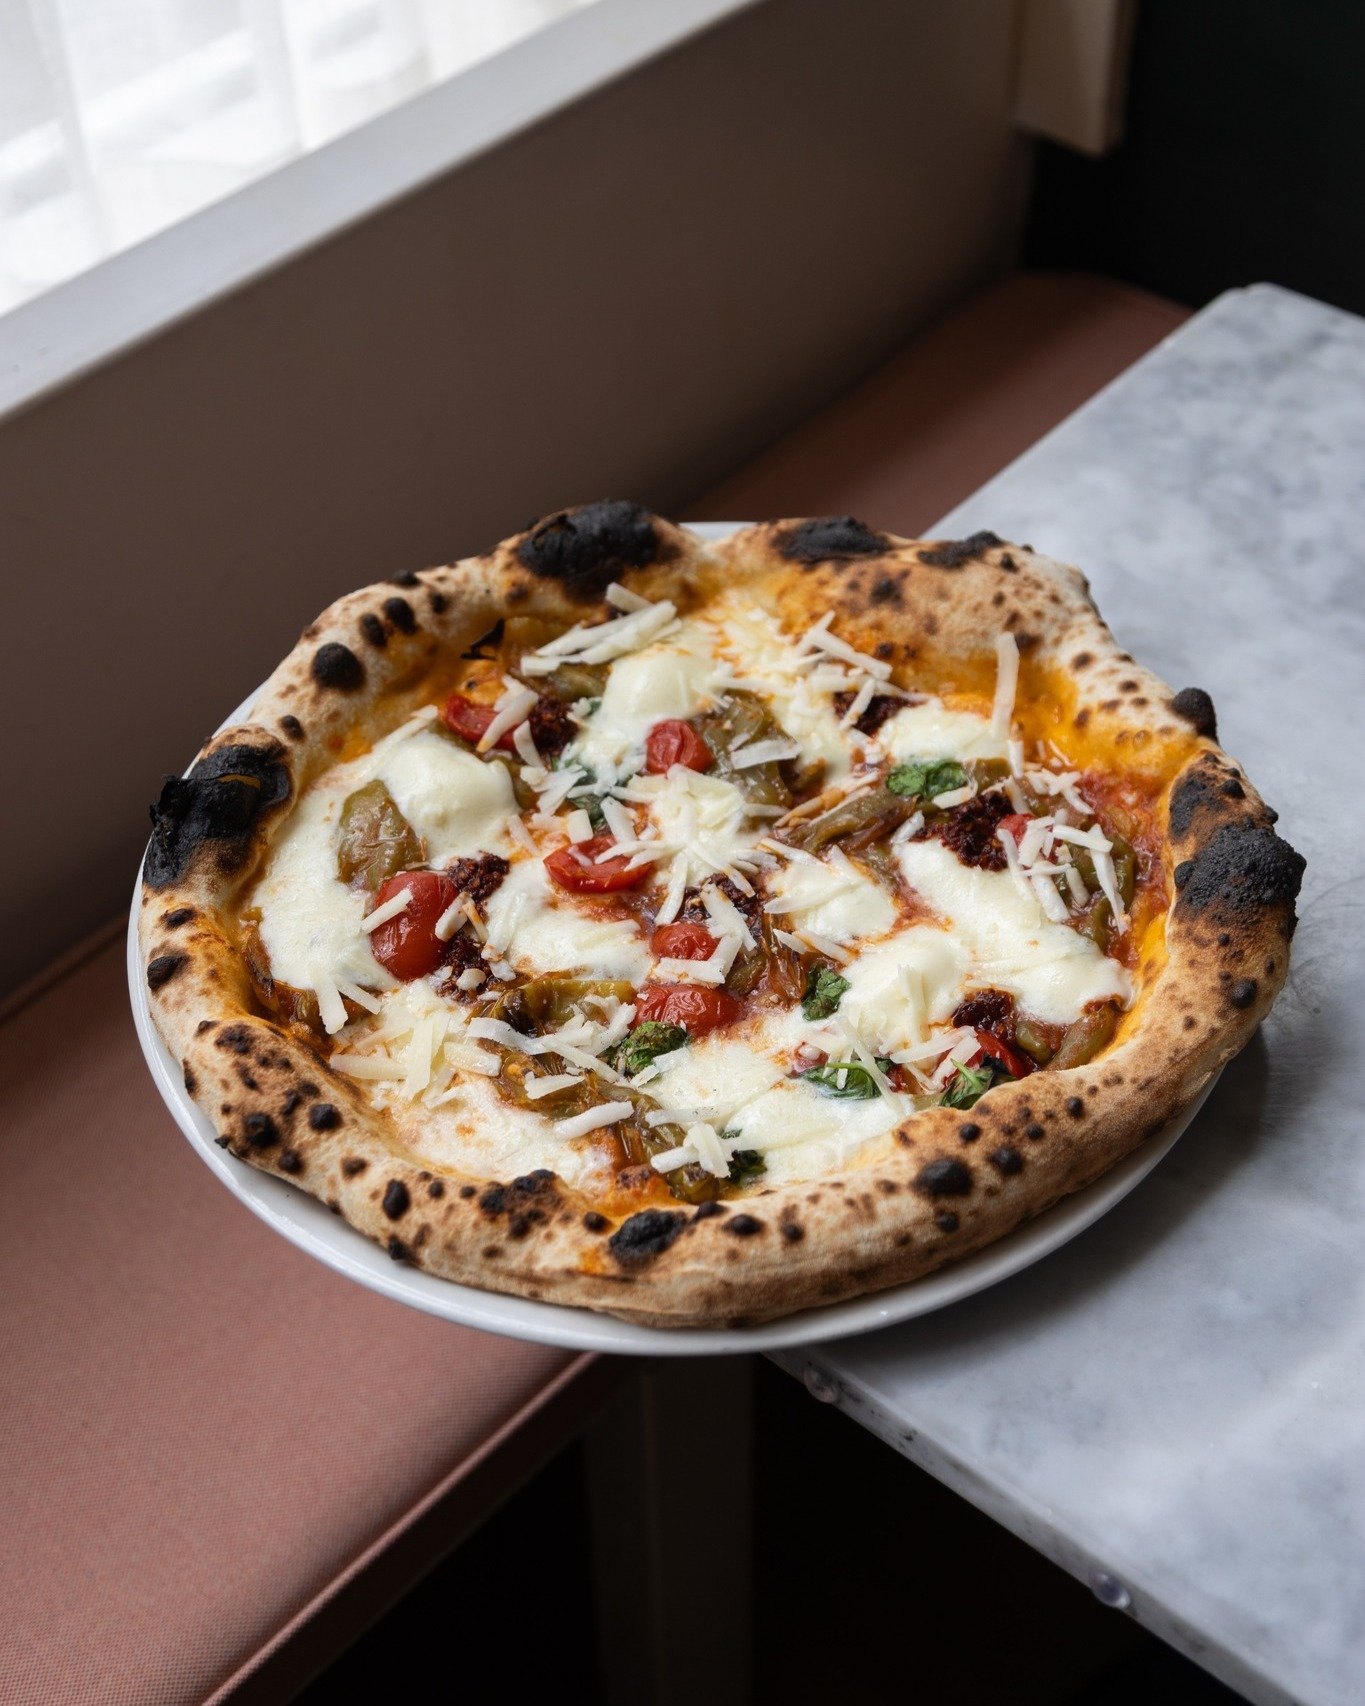 May's special is coming strong! Our Pizza Friggitelli, Salsiccia, Pecorino Romano is an explosion of different flavors, bringing together a handful of incredible ingredients representative of Southern and Central Italy: sweet, non-spicy Friggitelli p